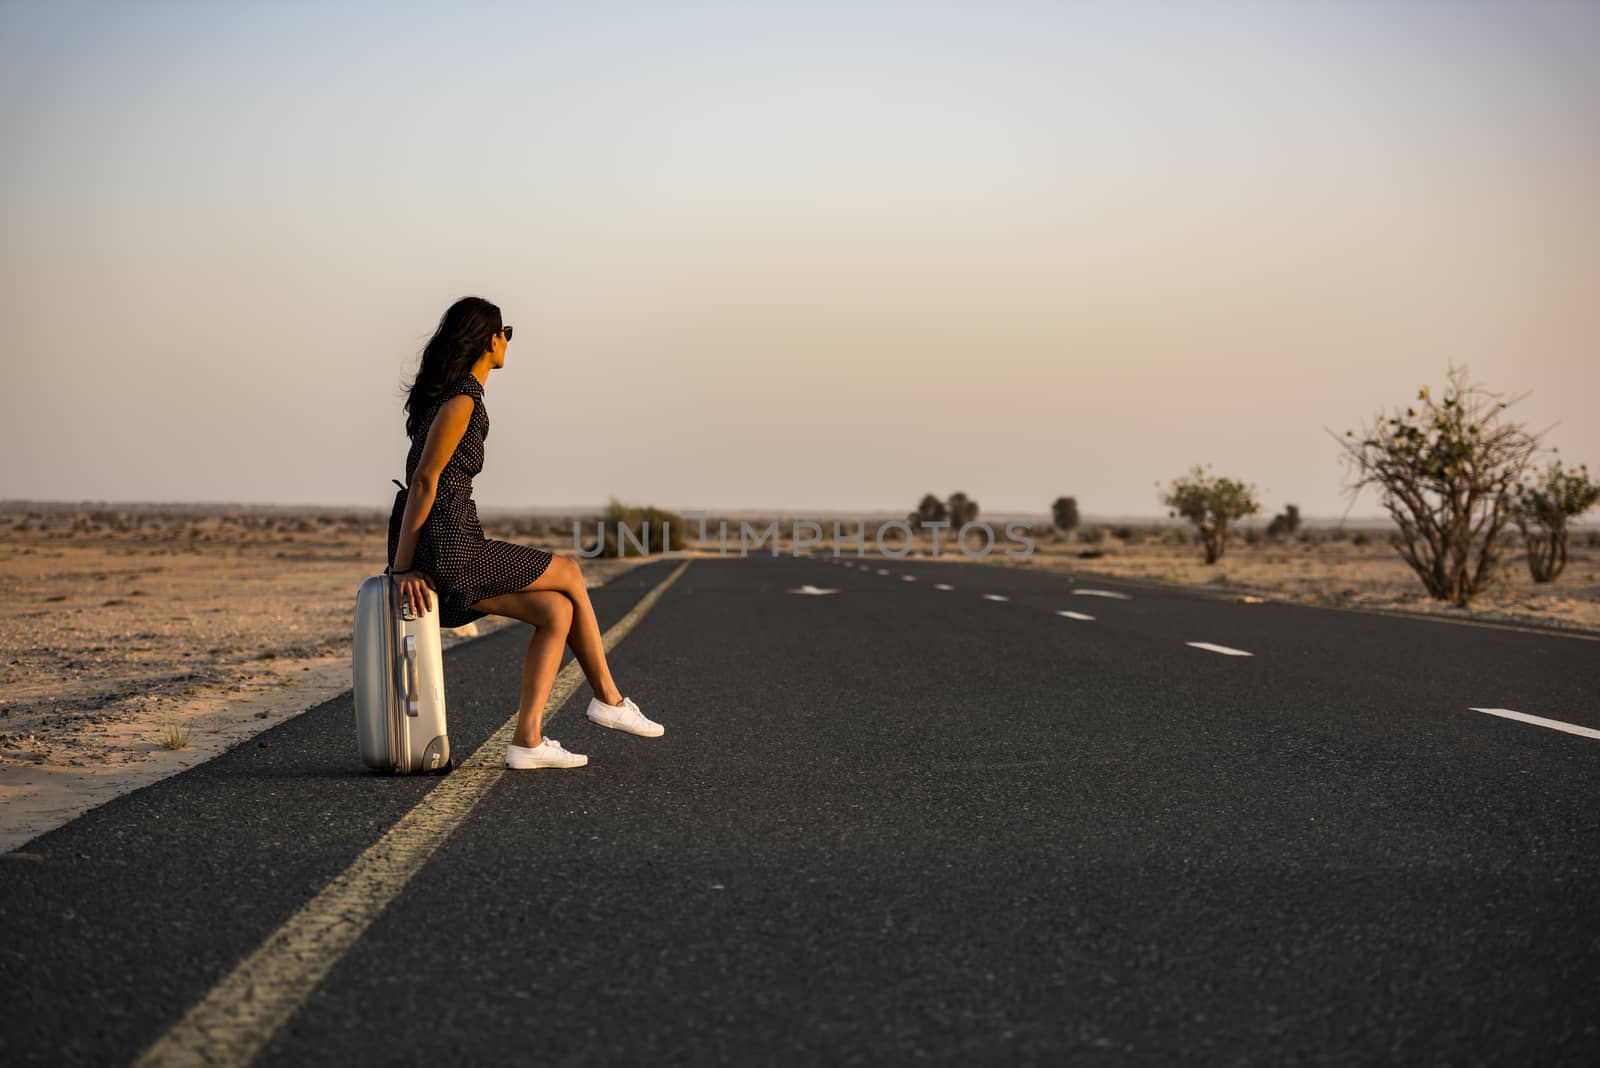 Woman waiting with her luggage on rural road in the desert for a lift or a vehicle to come